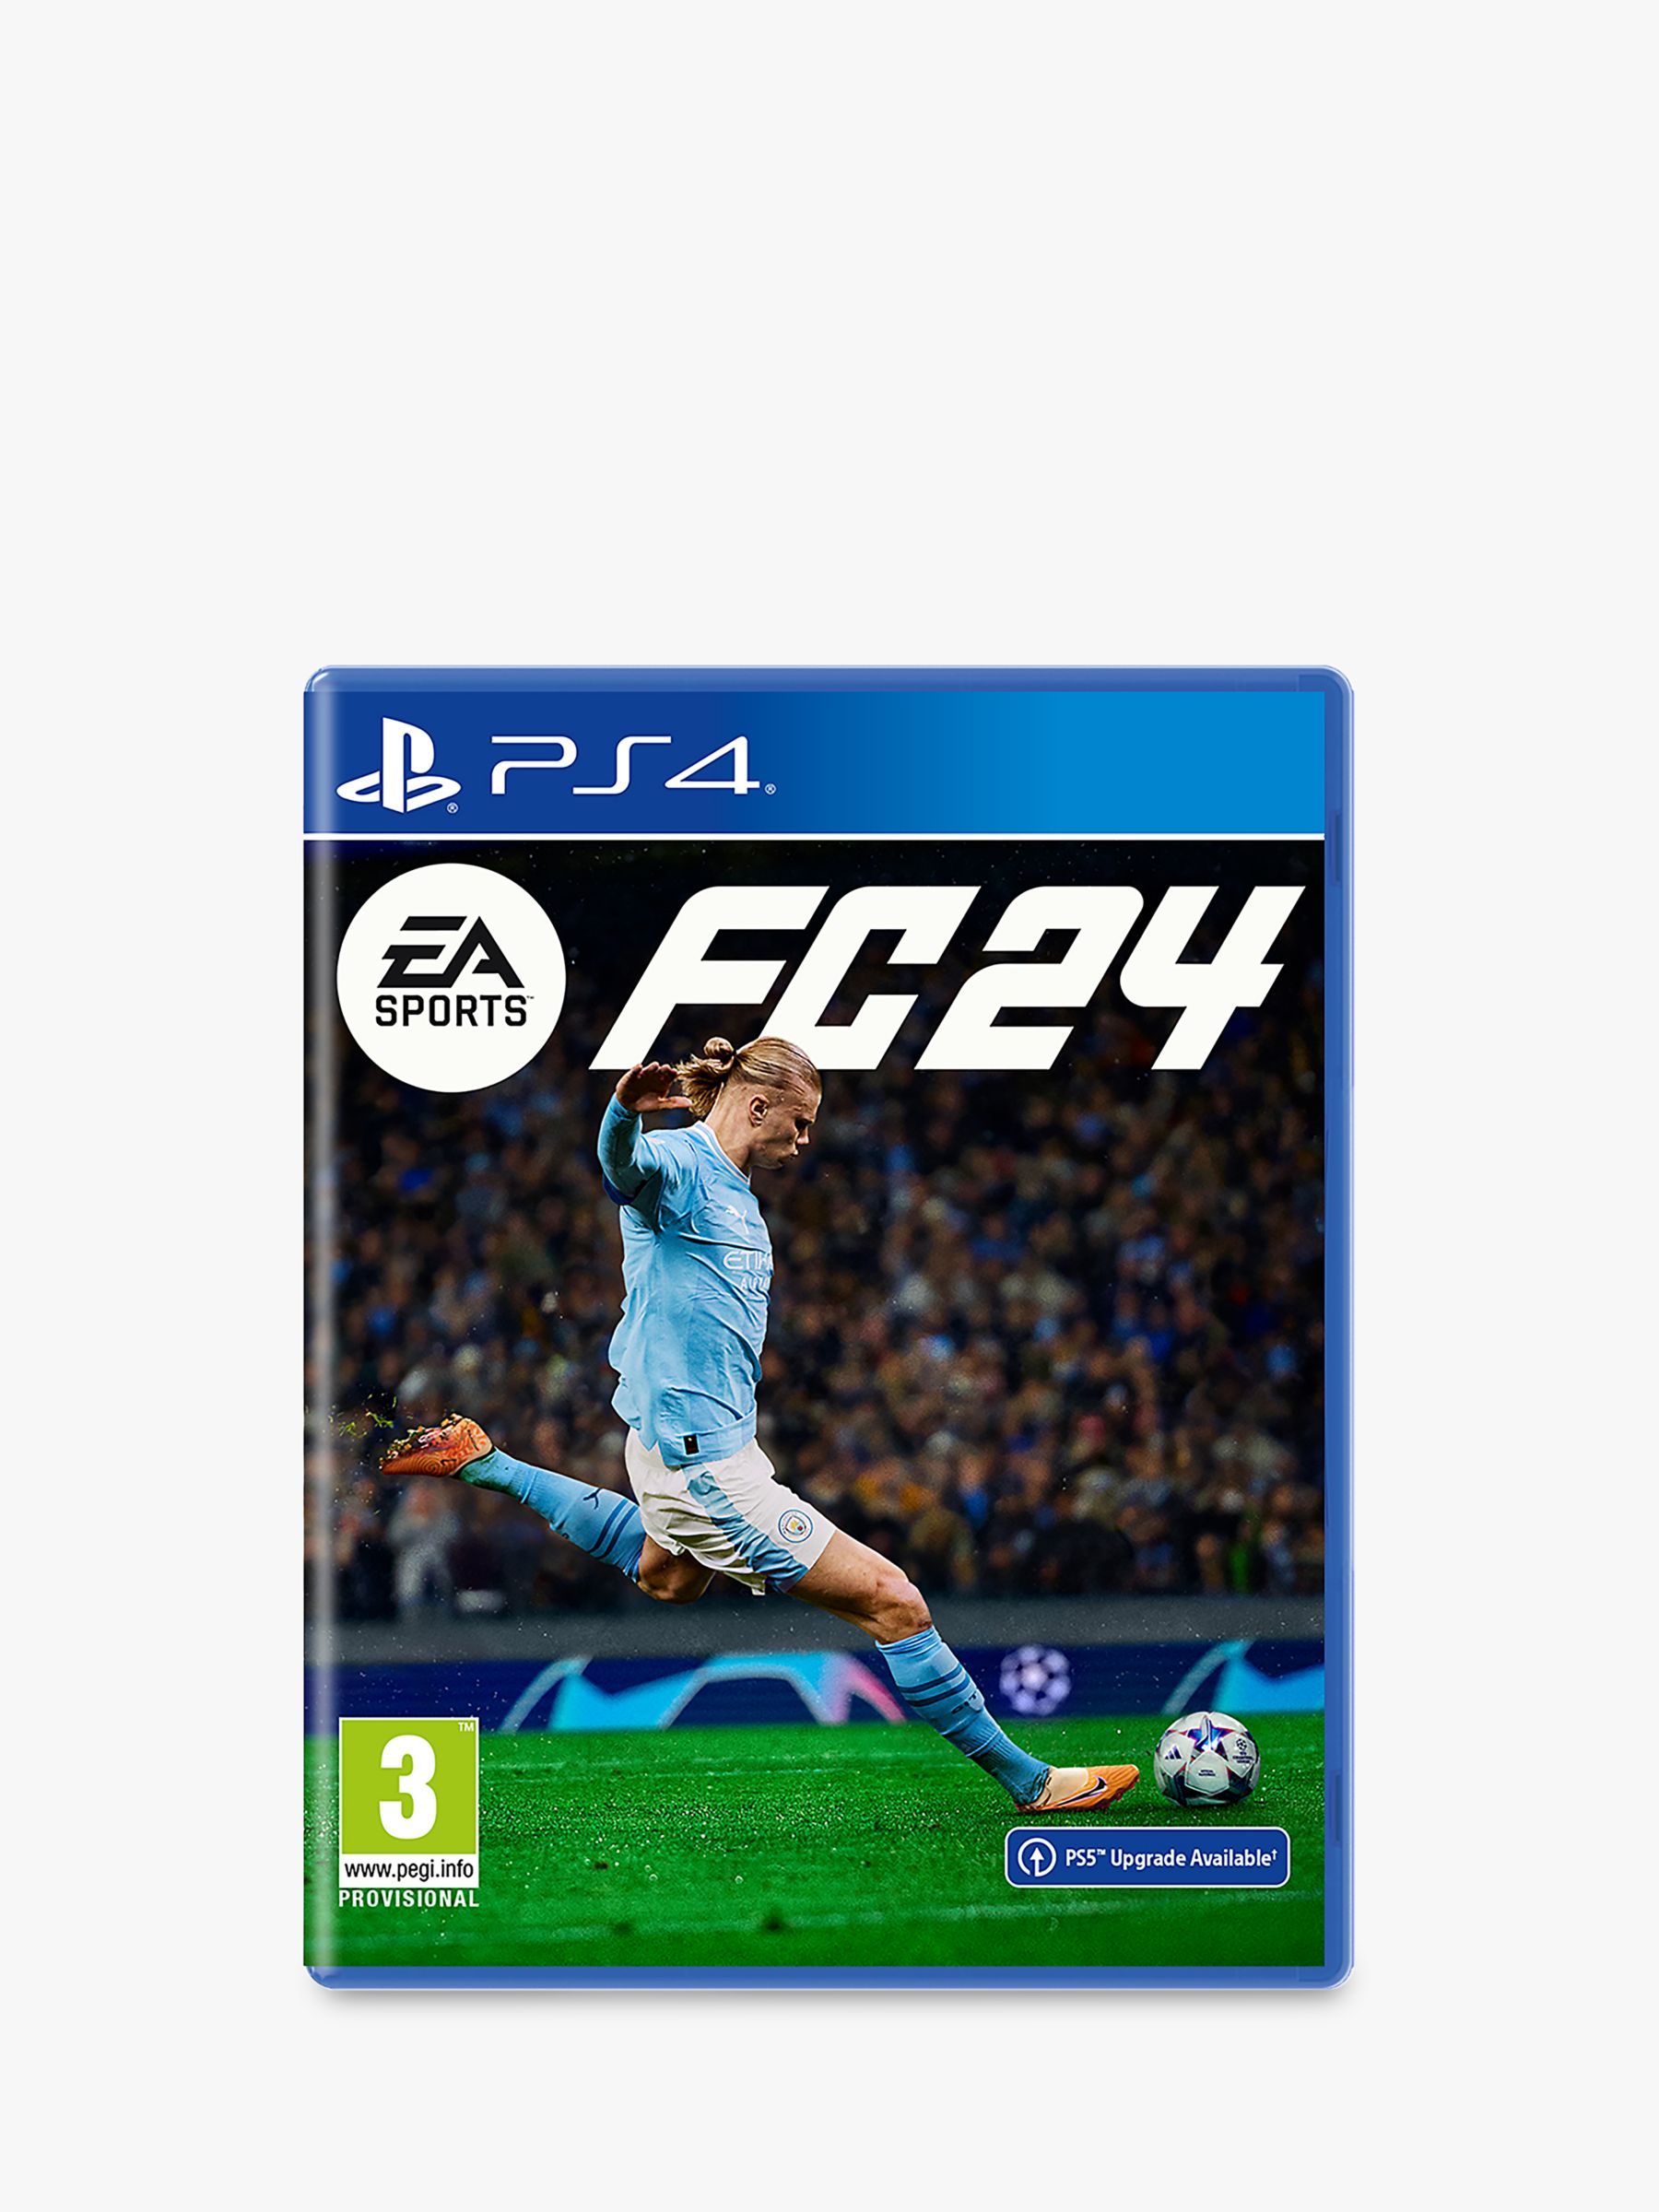 PS4 GAME EA Sports FC 24 PL POLISH COMMENTARY DUBBING POLAND NEW